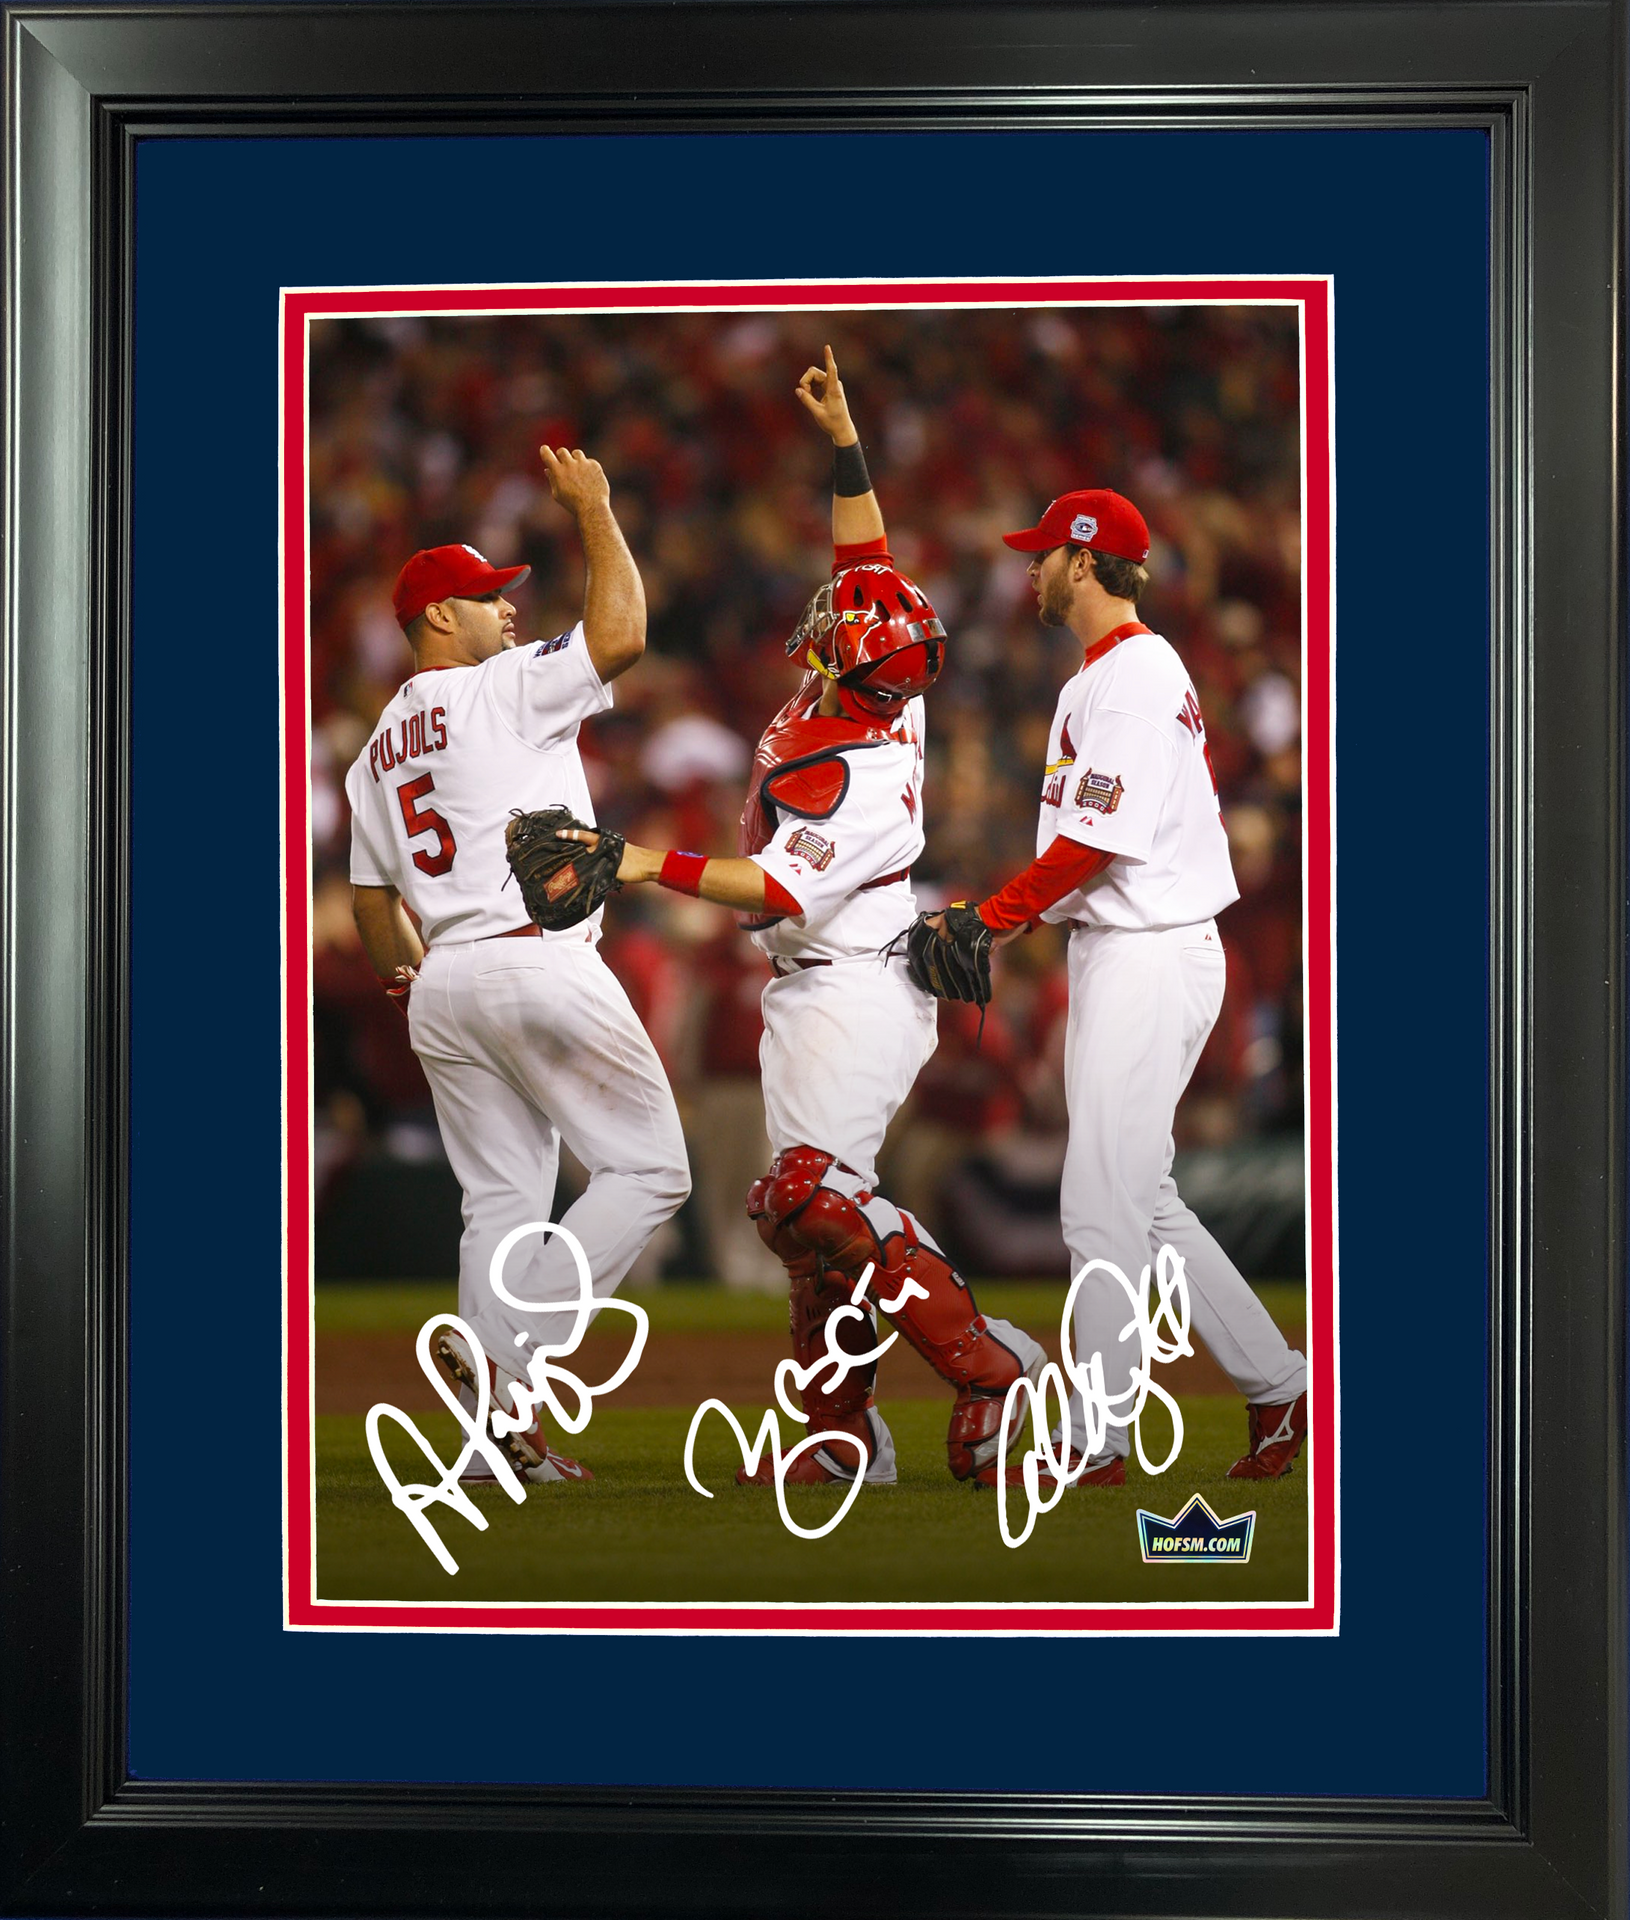 Legends Never Die, Inc. St. Louis Cardinals | The Big 3 | Molina - Wainwright - Pujols | 18x22 Framed Photo Collage